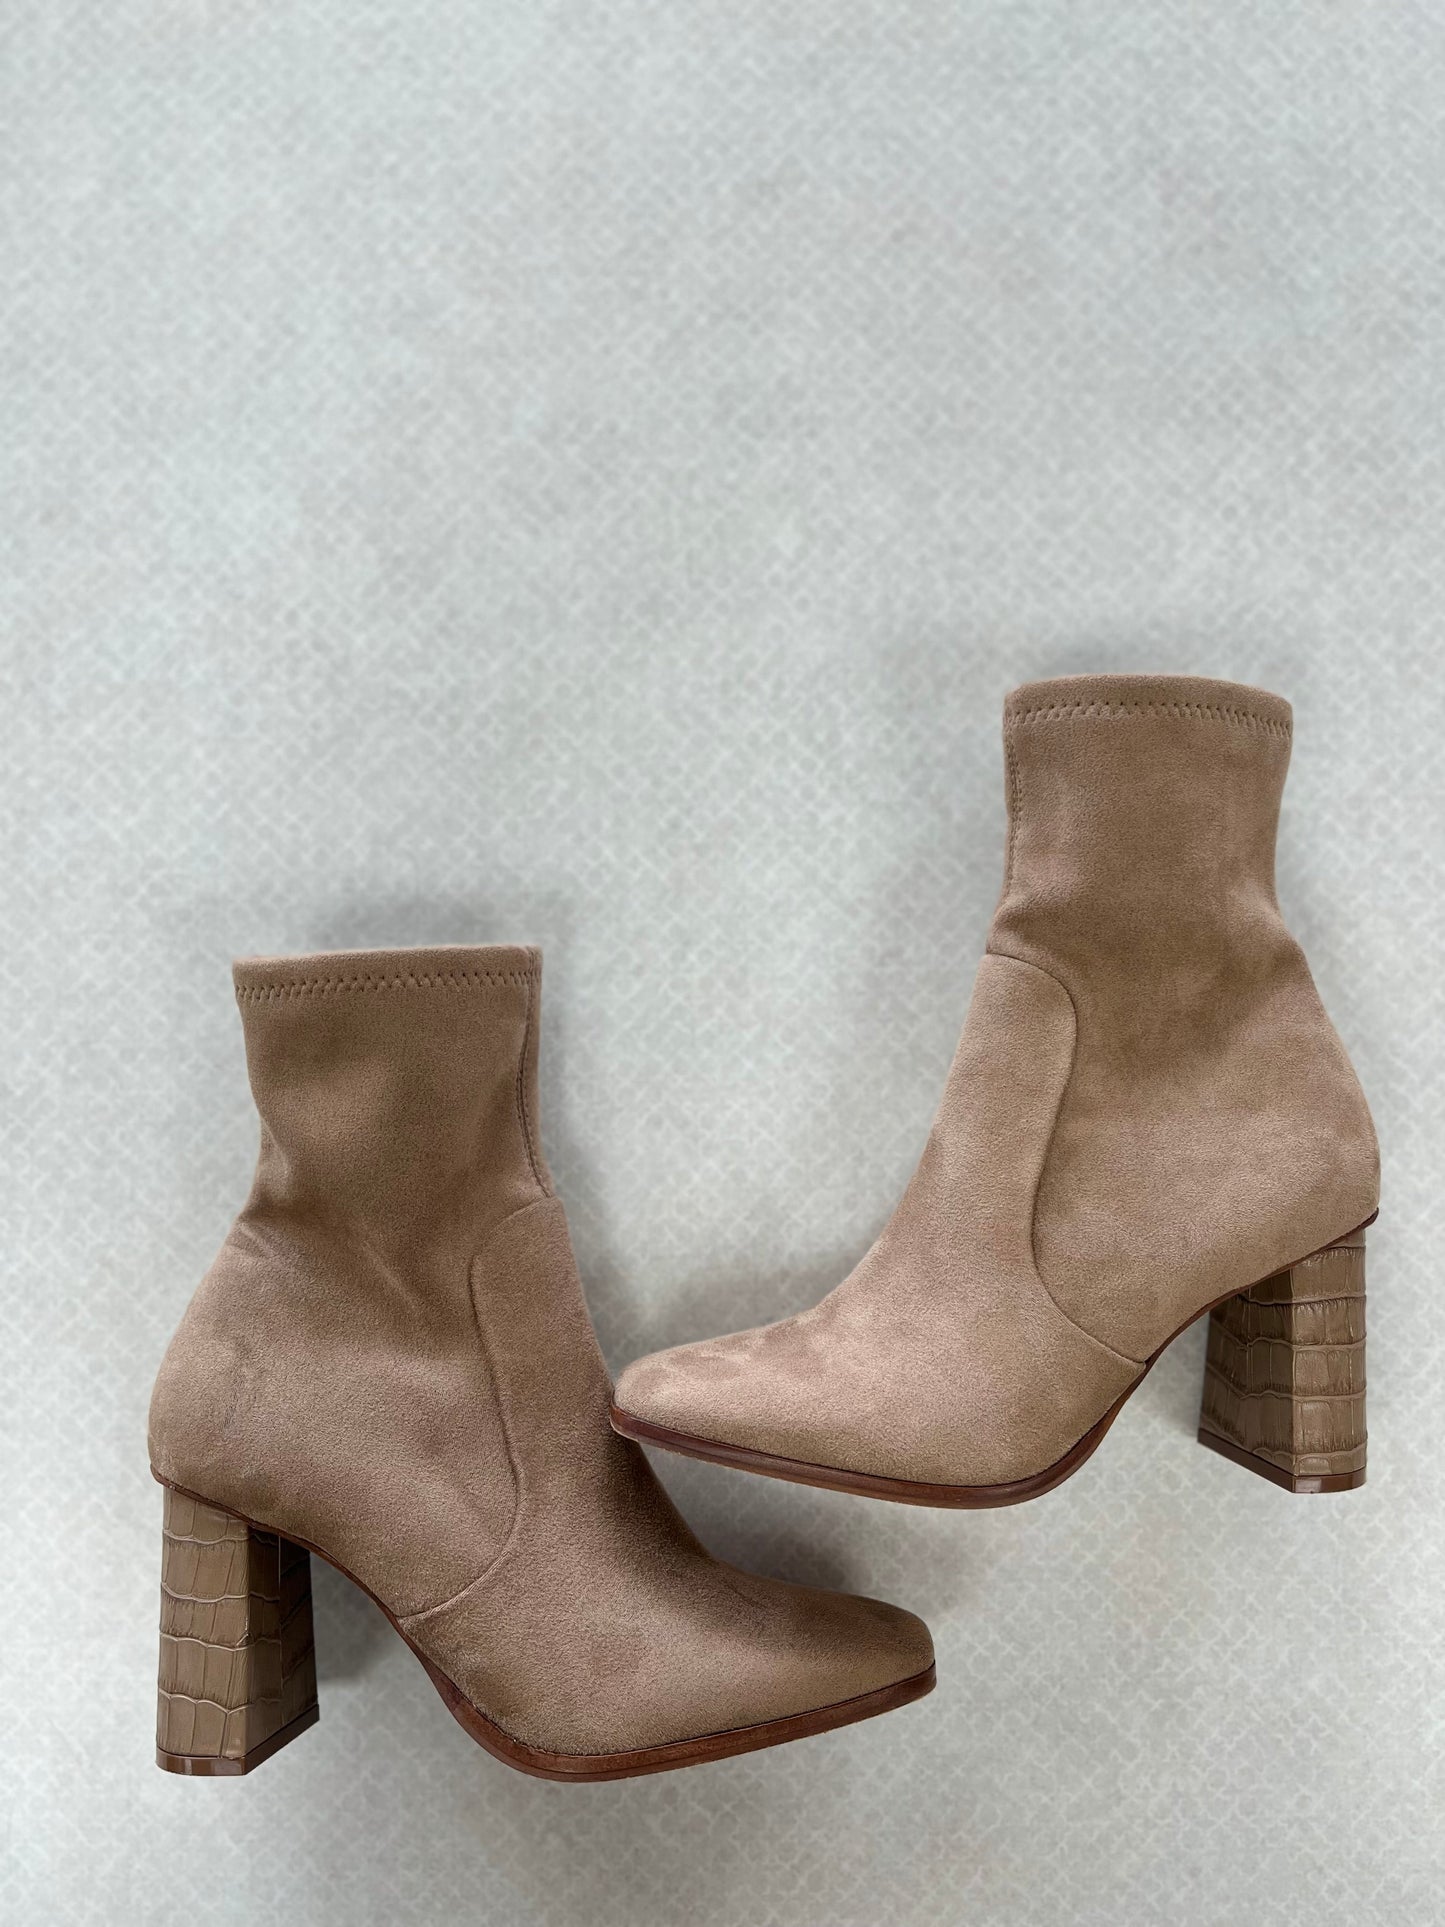 Tan Boots Ankle Heels Dolce Vita, Size 8.5